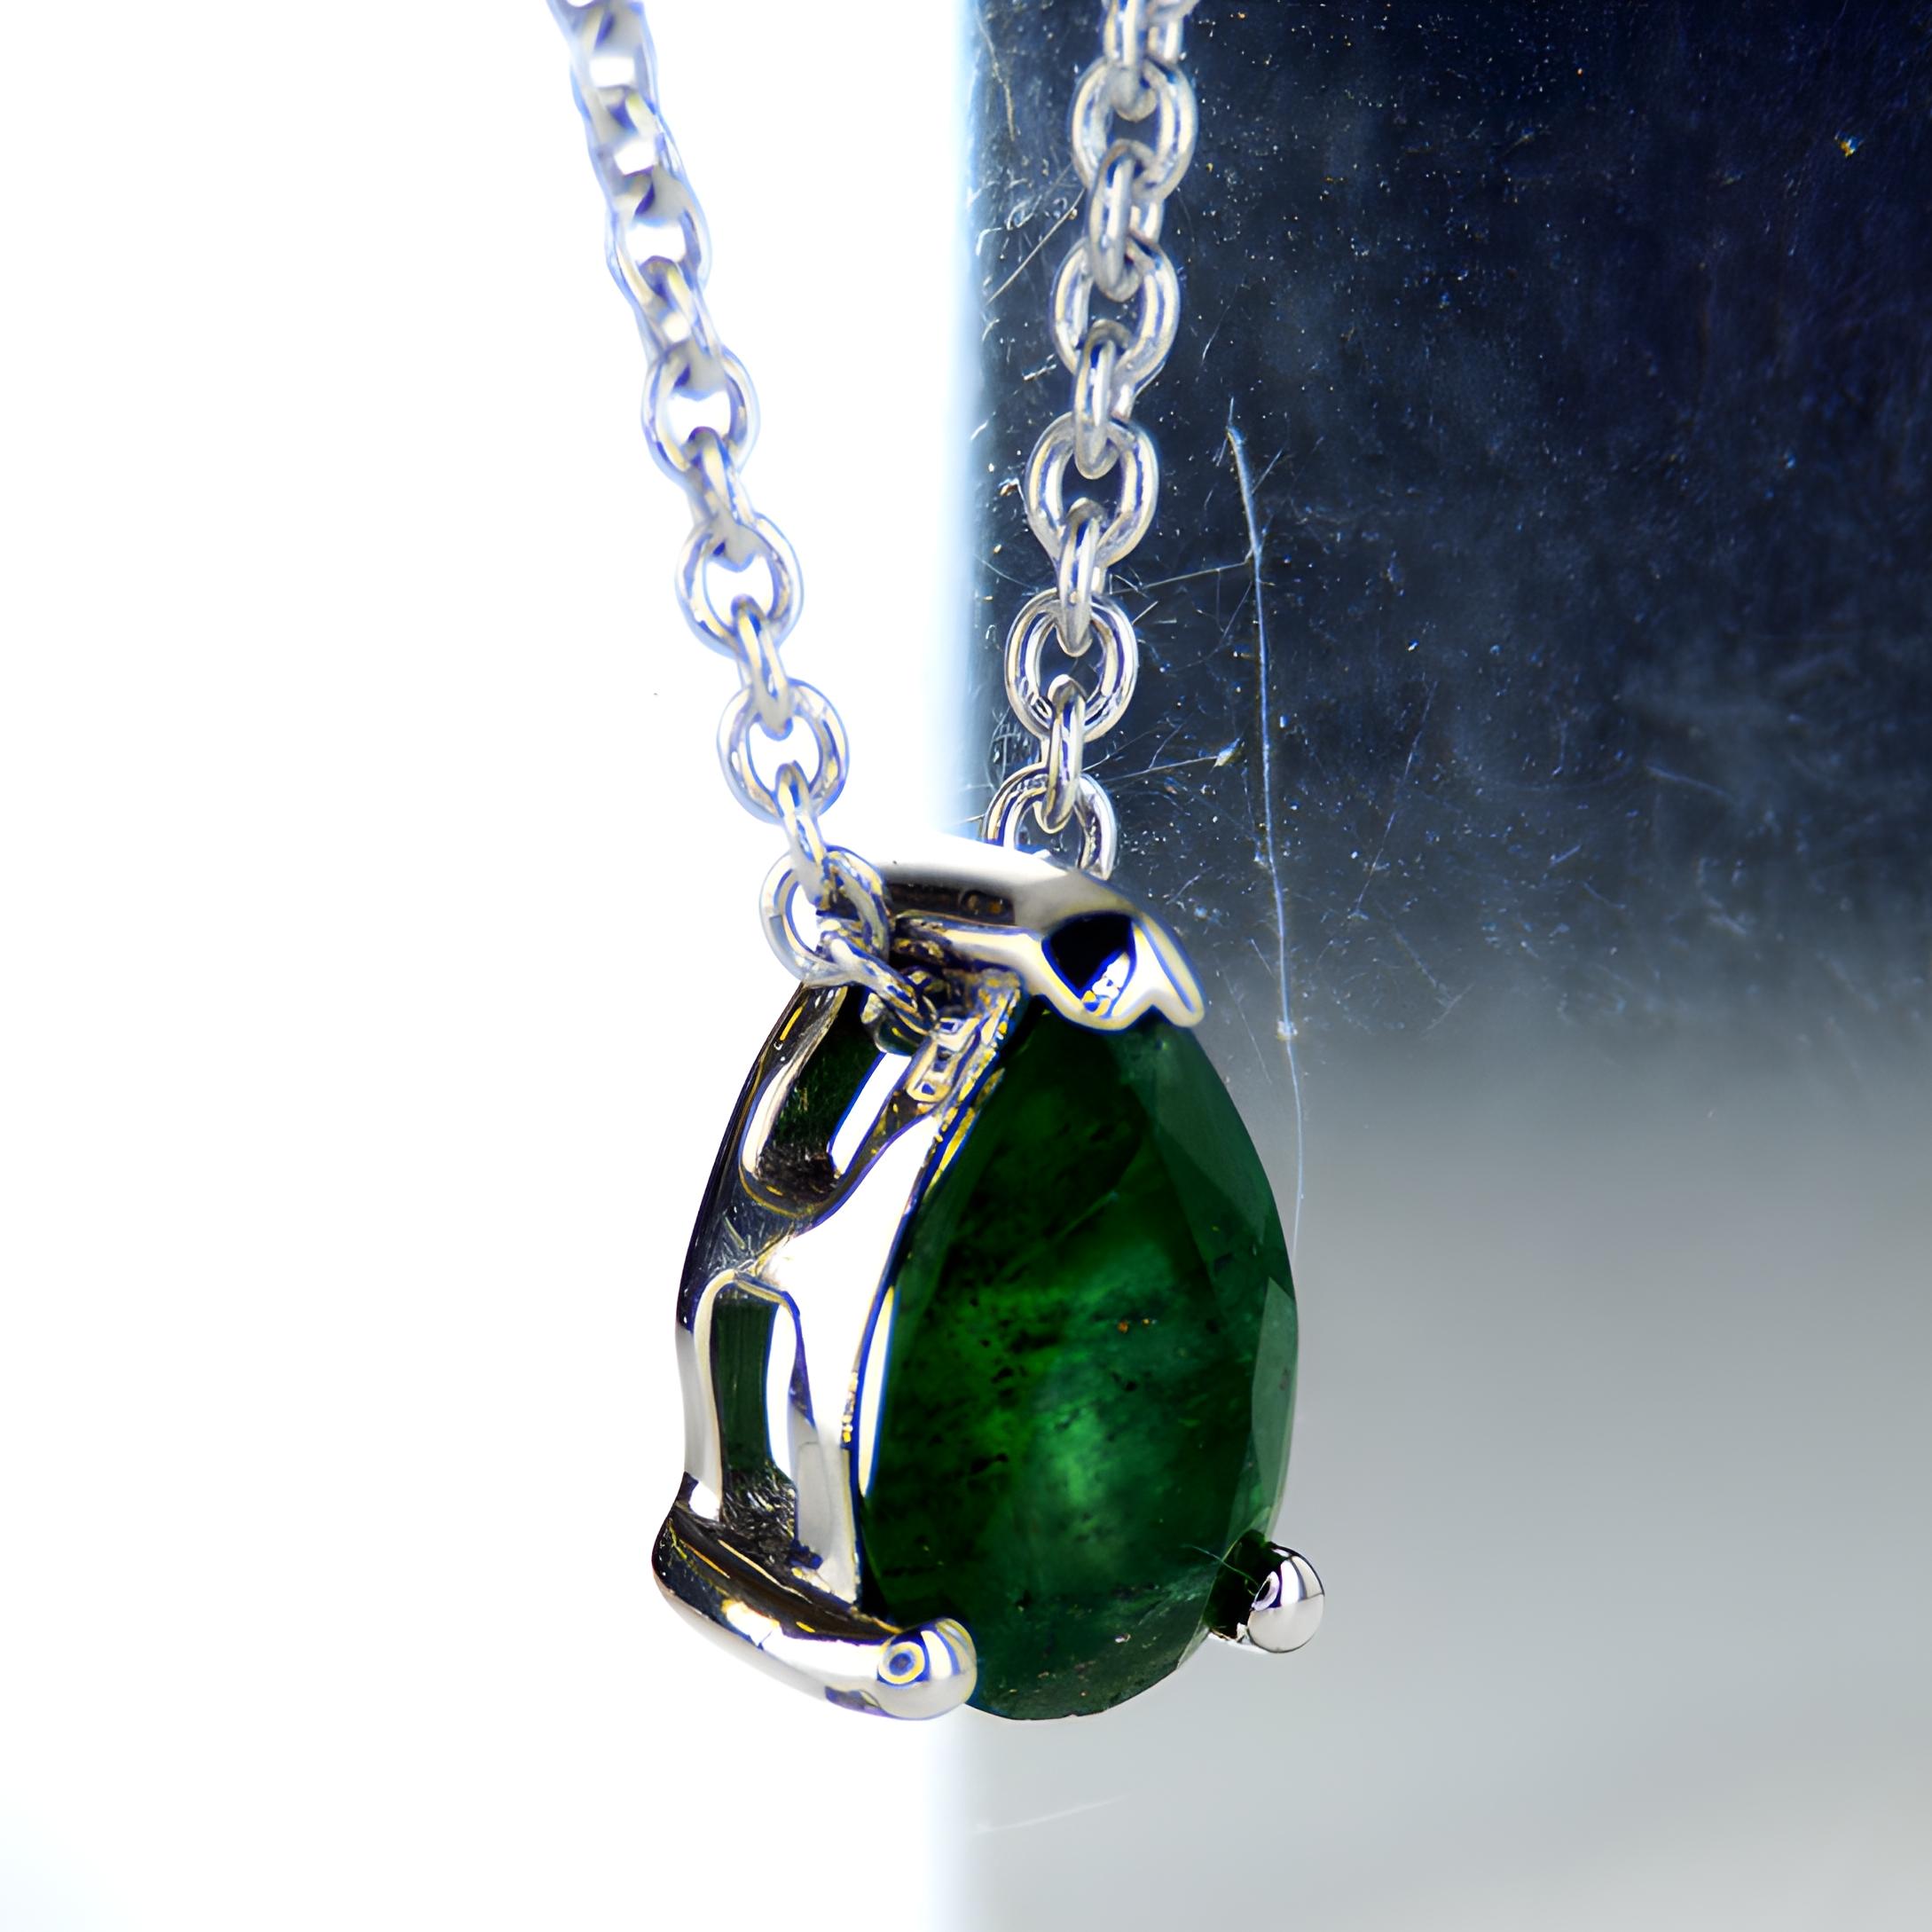 14K White Gold 0.49Ct Pear Shape Emerald Necklace

Product Description:

Introducing our Pear Shape Emerald White Gold Necklace, an exquisite piece that showcases the timeless beauty of a 0.49Ct pear shape emerald, elegantly set in 14K white gold. A